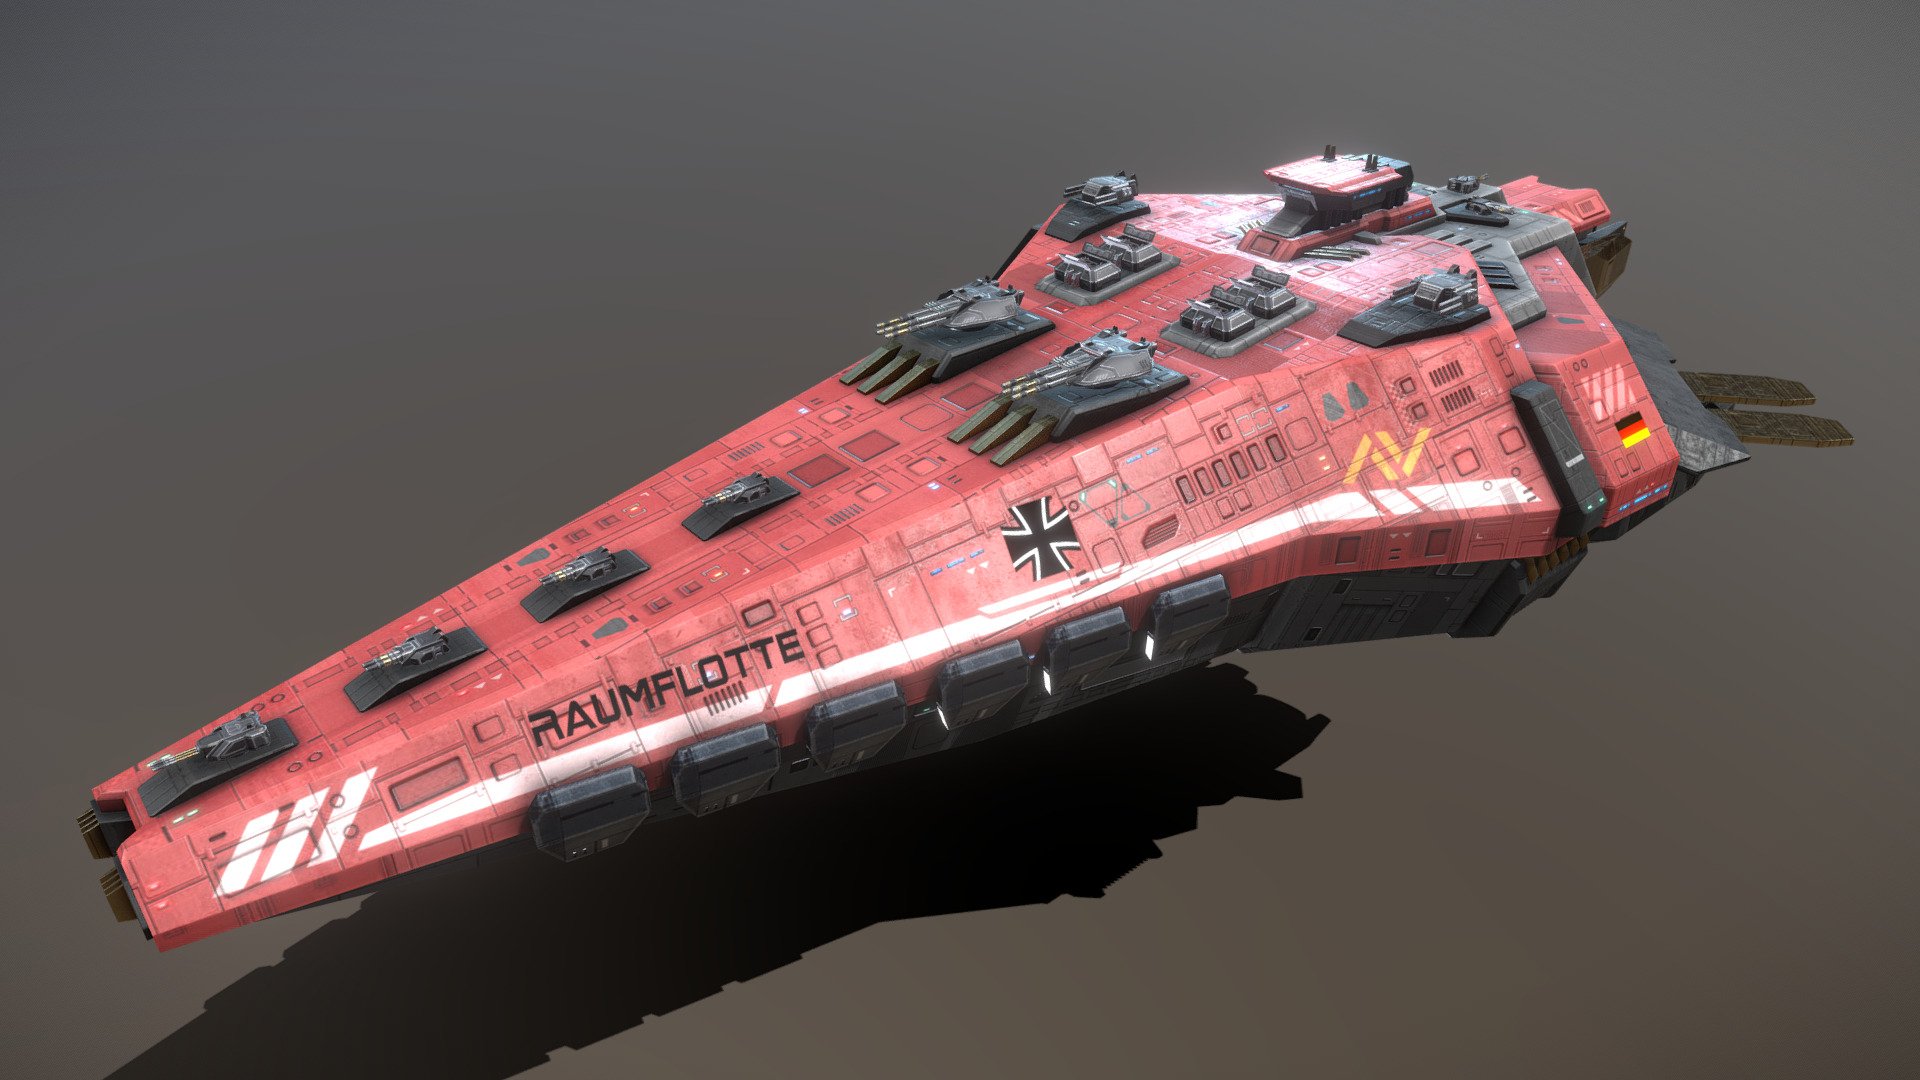 This is a model of a low-poly and game-ready scifi spaceship. 

The weapons are separate meshes and can be animated with a keyframe animation tool. The weapon loadout can be changed too. 

This model has optional maneuvering thrusters for newtonian physics based movement. They do fit on other ships too.

The model comes with several differently colored texture sets. The PSD file with intact layers is included.

Please note: The textures in the Sketchfab viewer have a reduced resolution (2K instead of 4K) to improve Sketchfab loading speed.

If you have purchased this model please make sure to download the “additional file”.  It contains FBX and OBJ meshes, full resolution textures and the source PSDs with intact layers. The meshes are separate and can be animated (e.g. firing animations for gun barrels, rotating turrets, etc) 3d model